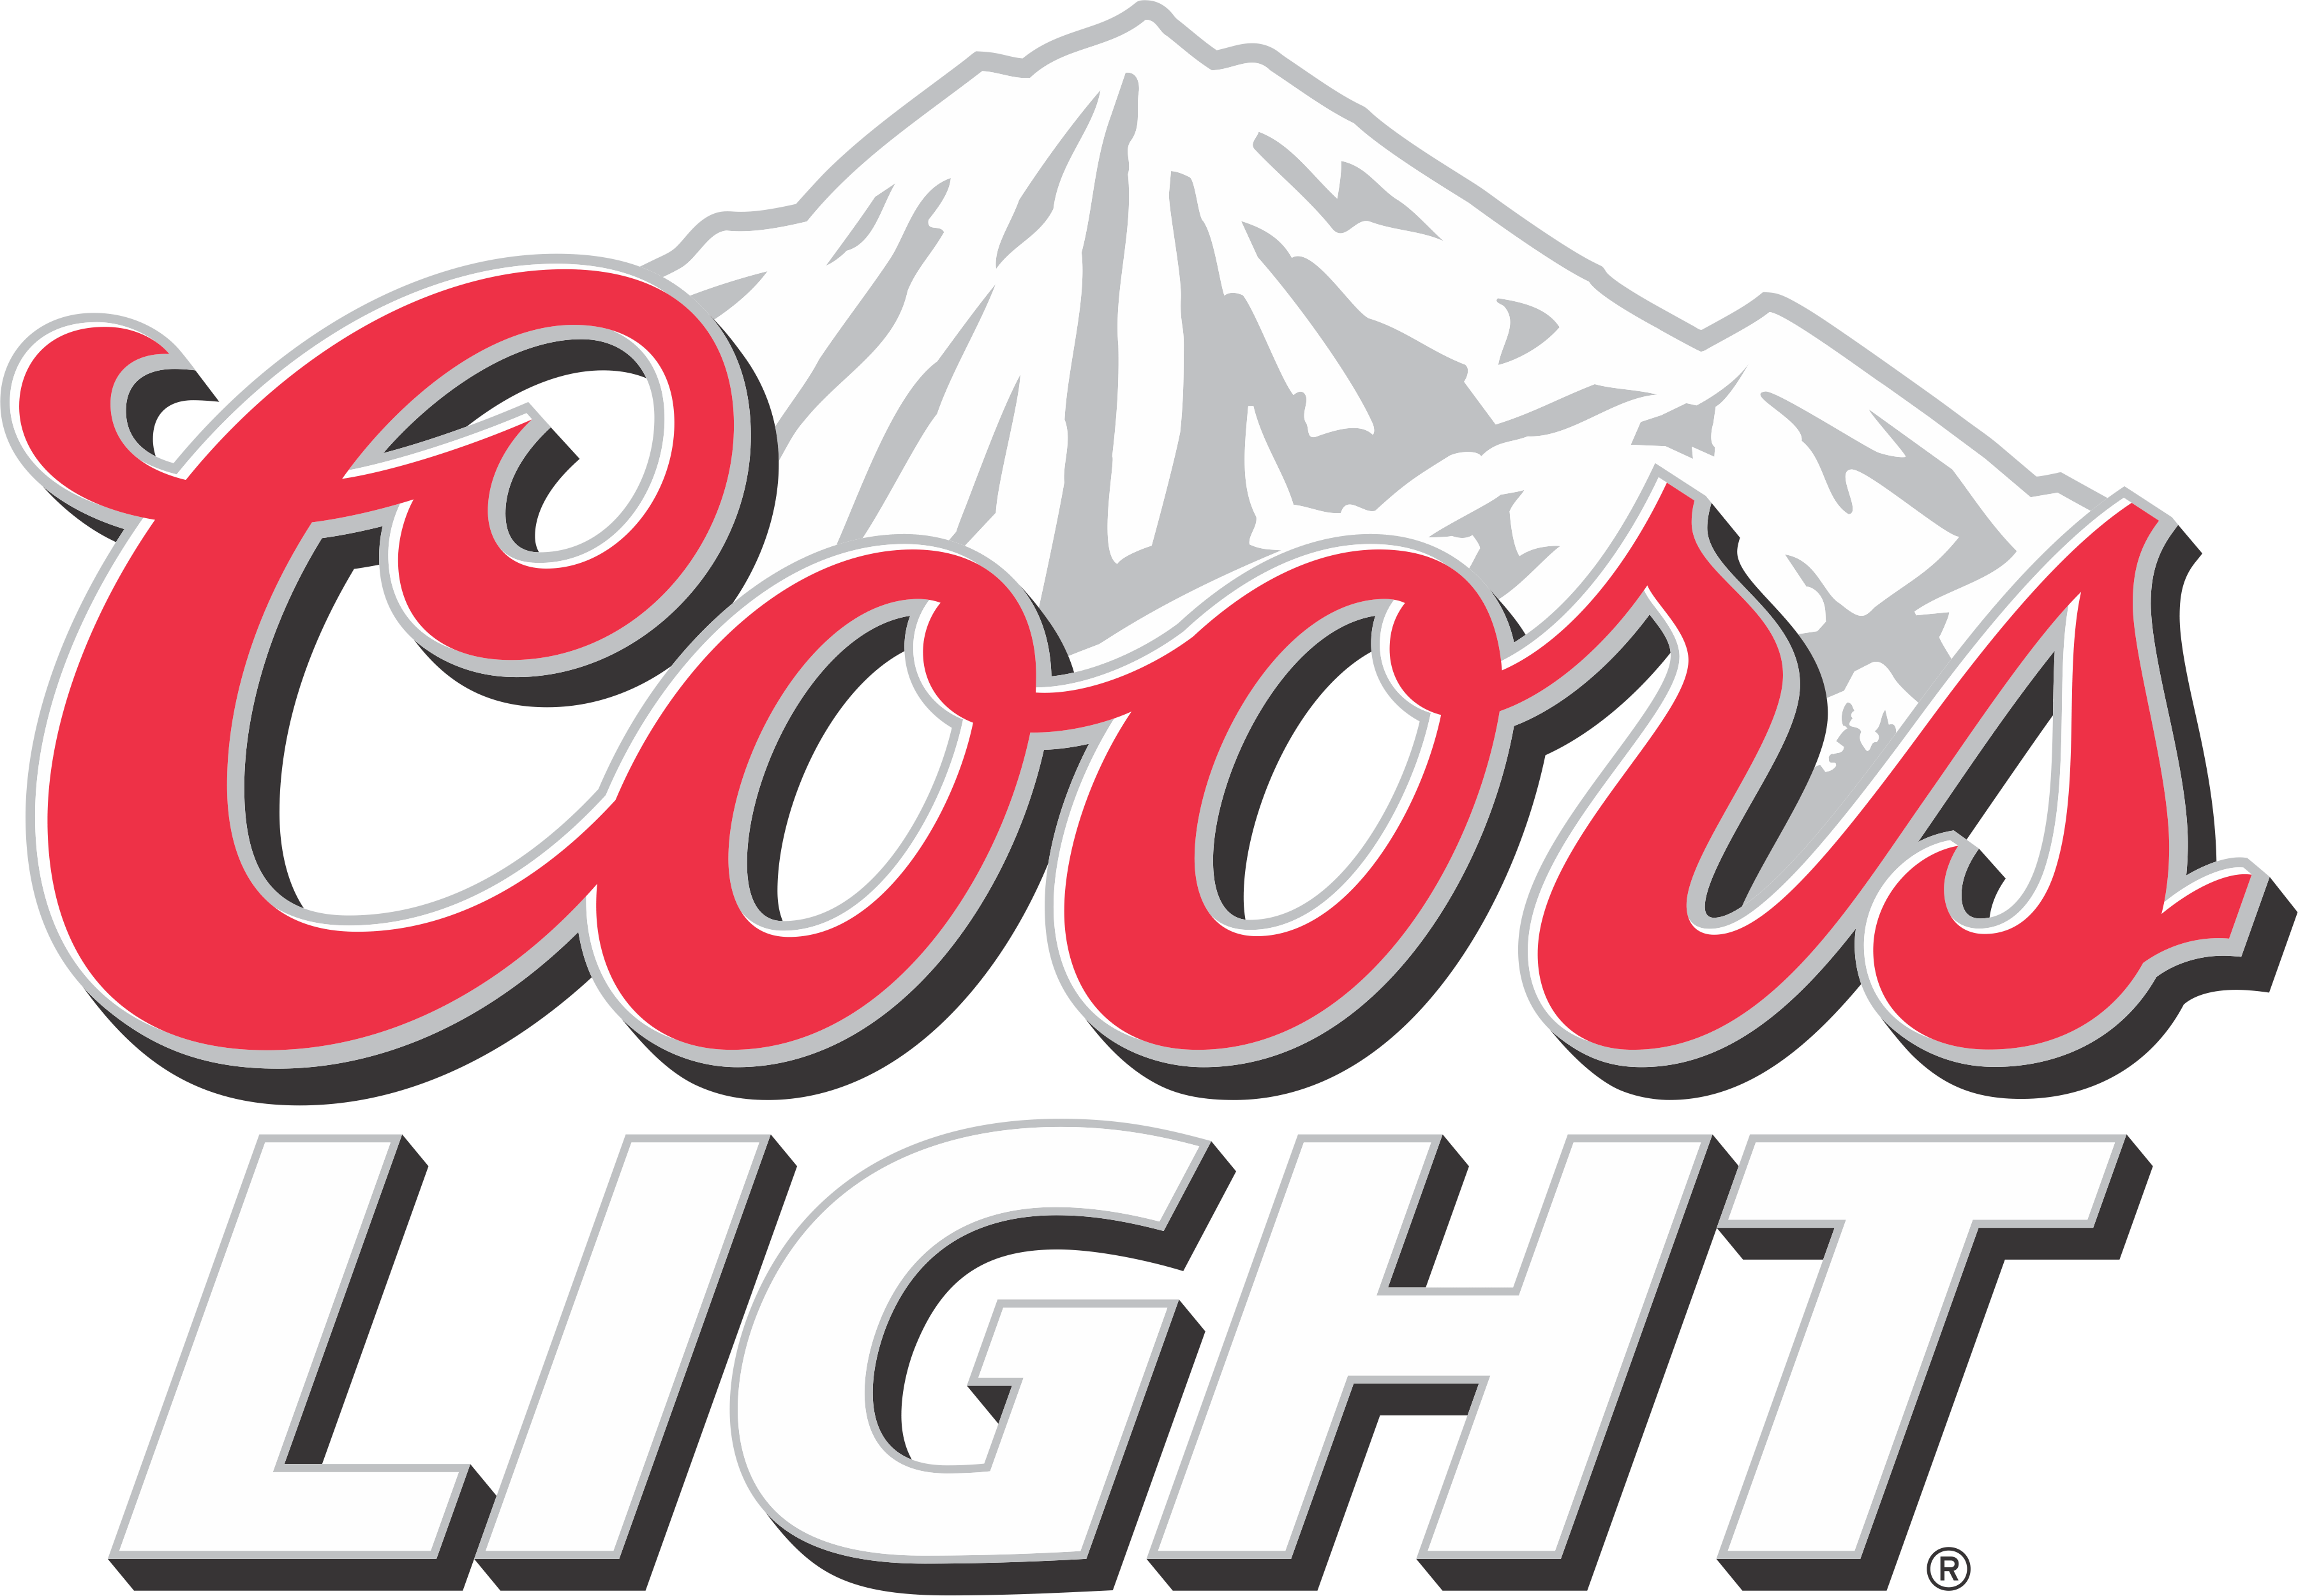 Old Coors Light Logo - Coors Light - Northwest Montana Fair and Rodeo